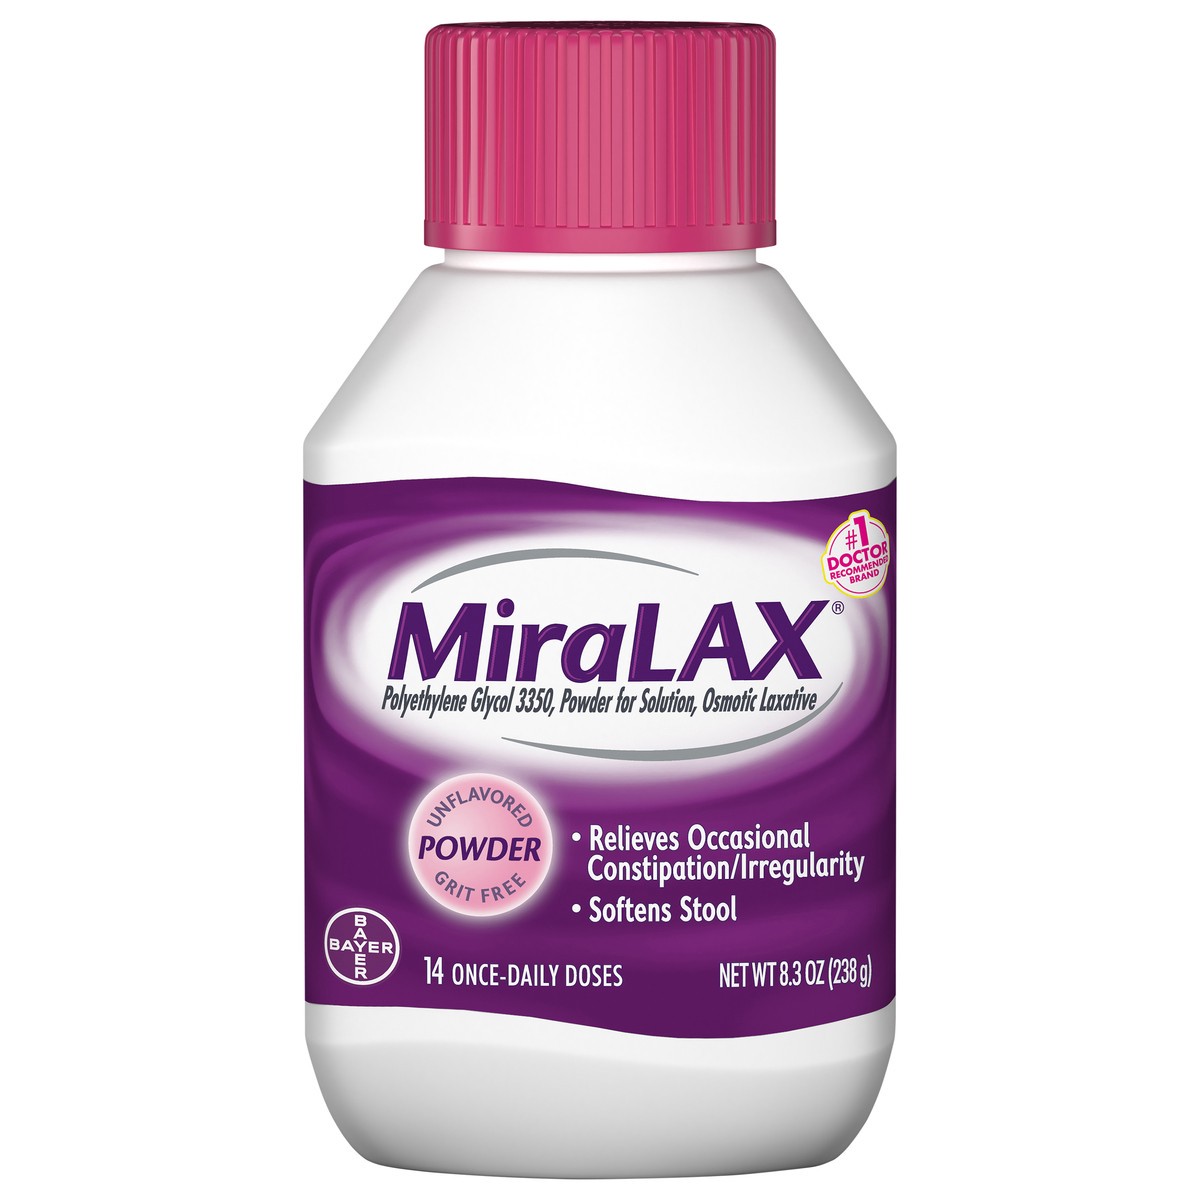 slide 1 of 37, Miralax Powder Osmotic Unflavored Laxative 8.3 oz Bottle, 